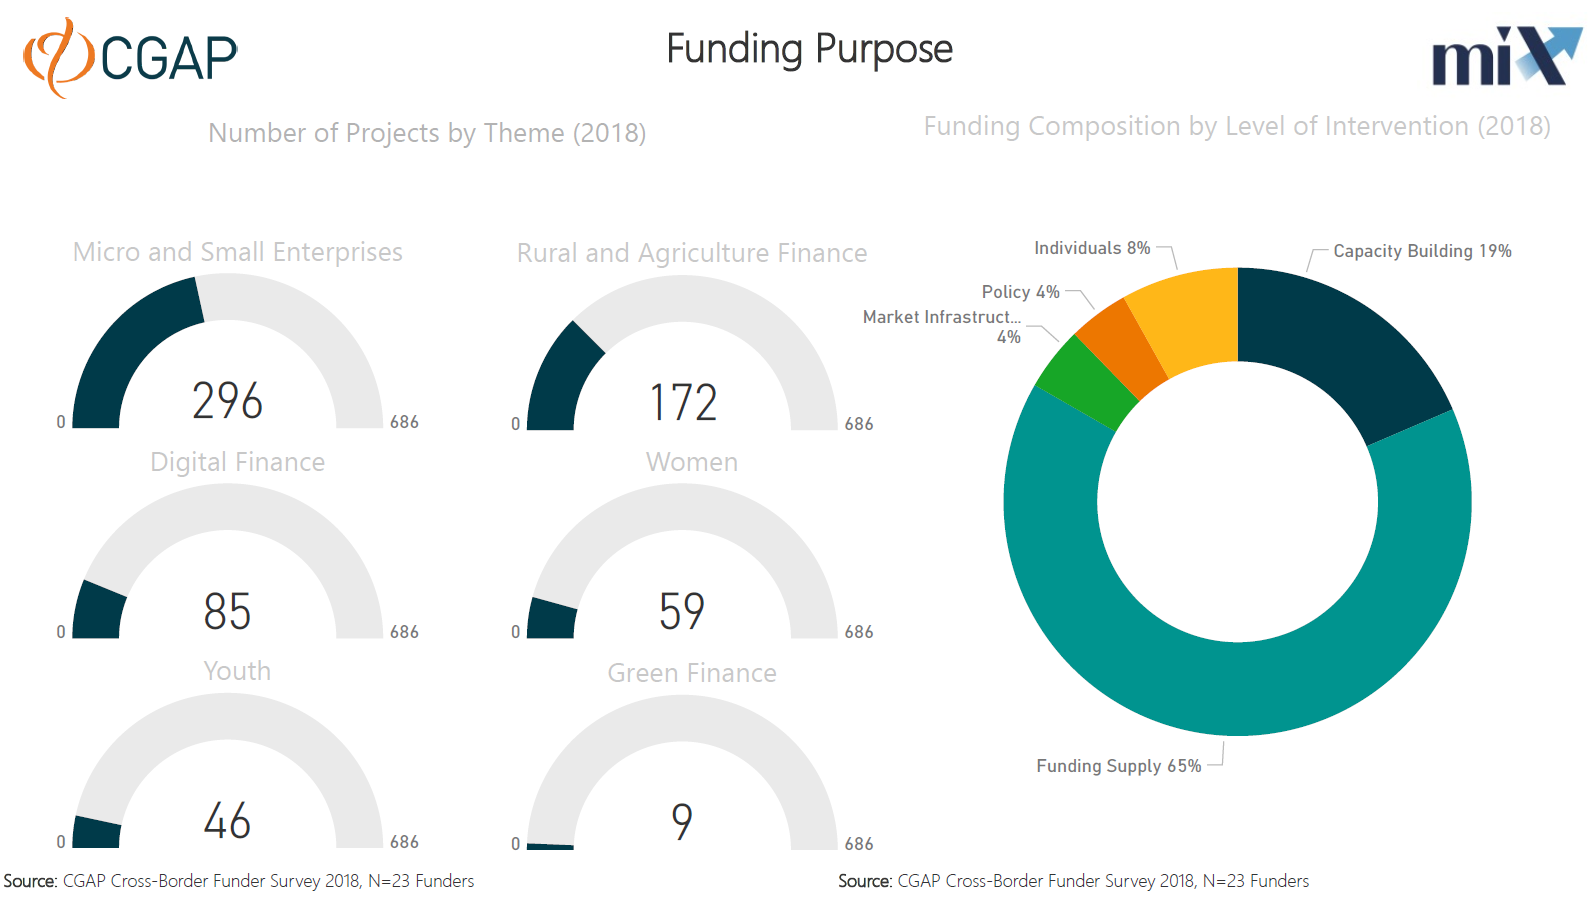 hat do funders fund in Sub-Saharan Africa? (Themes, funding purpose)